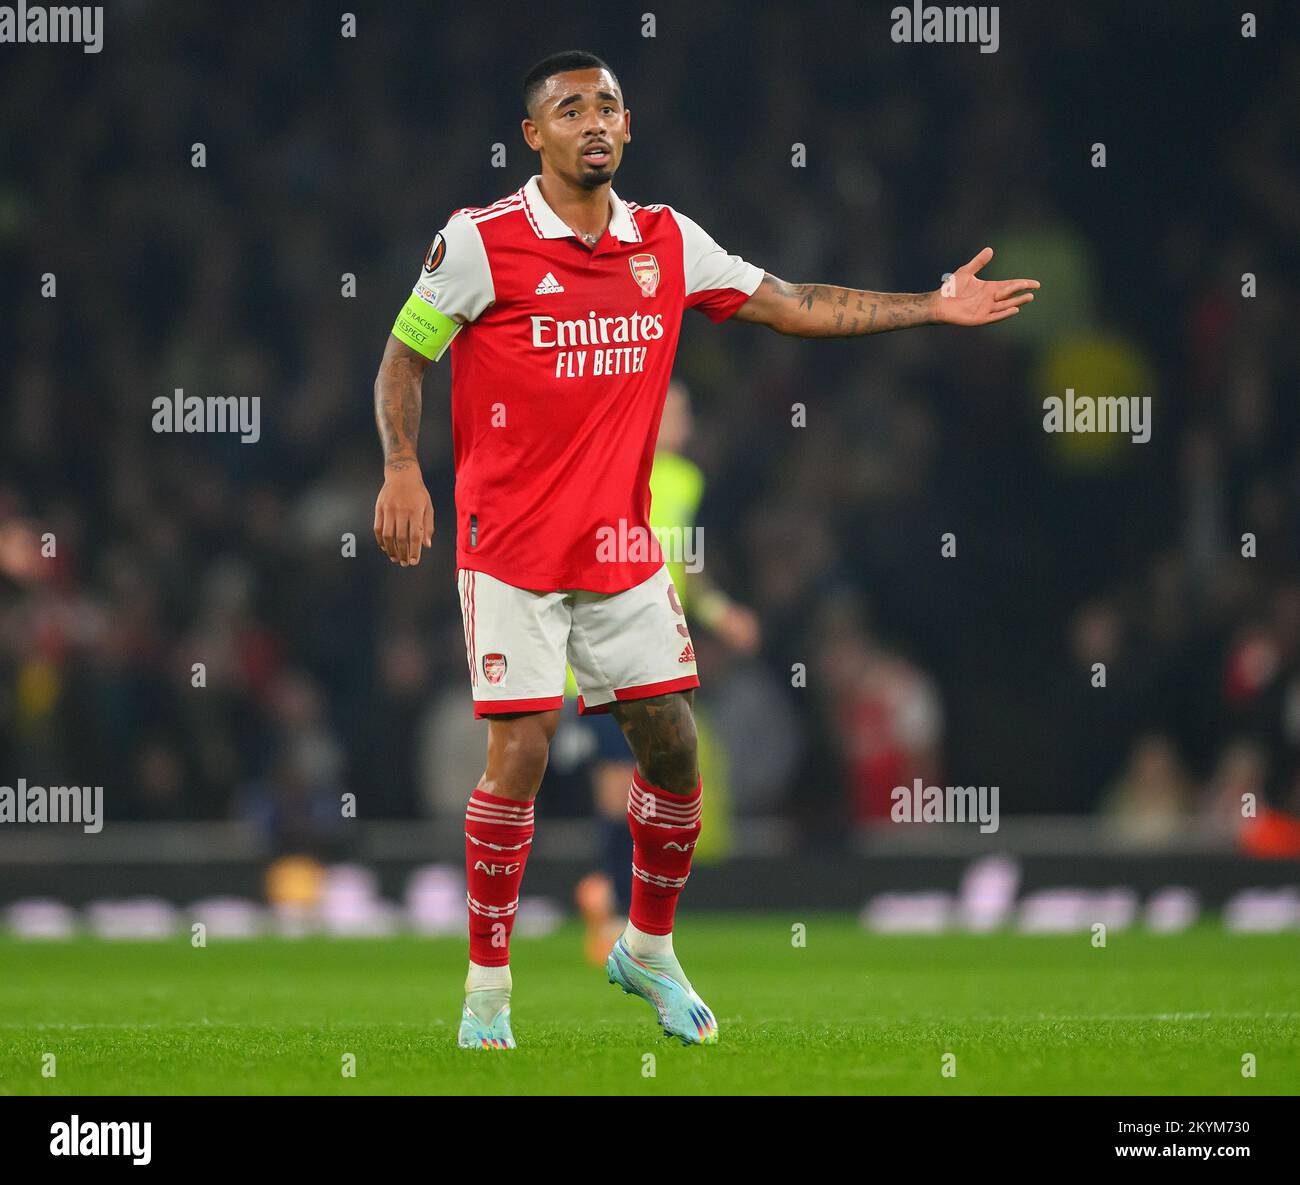 03 Nov 2022 - Arsenal v FC Zurich - UEFA Europa League - Group A - Emirates Stadium Arsenals Gabriel Jesus during the match against FC Zurich Picture Mark Pain / Alamy Stock Photo